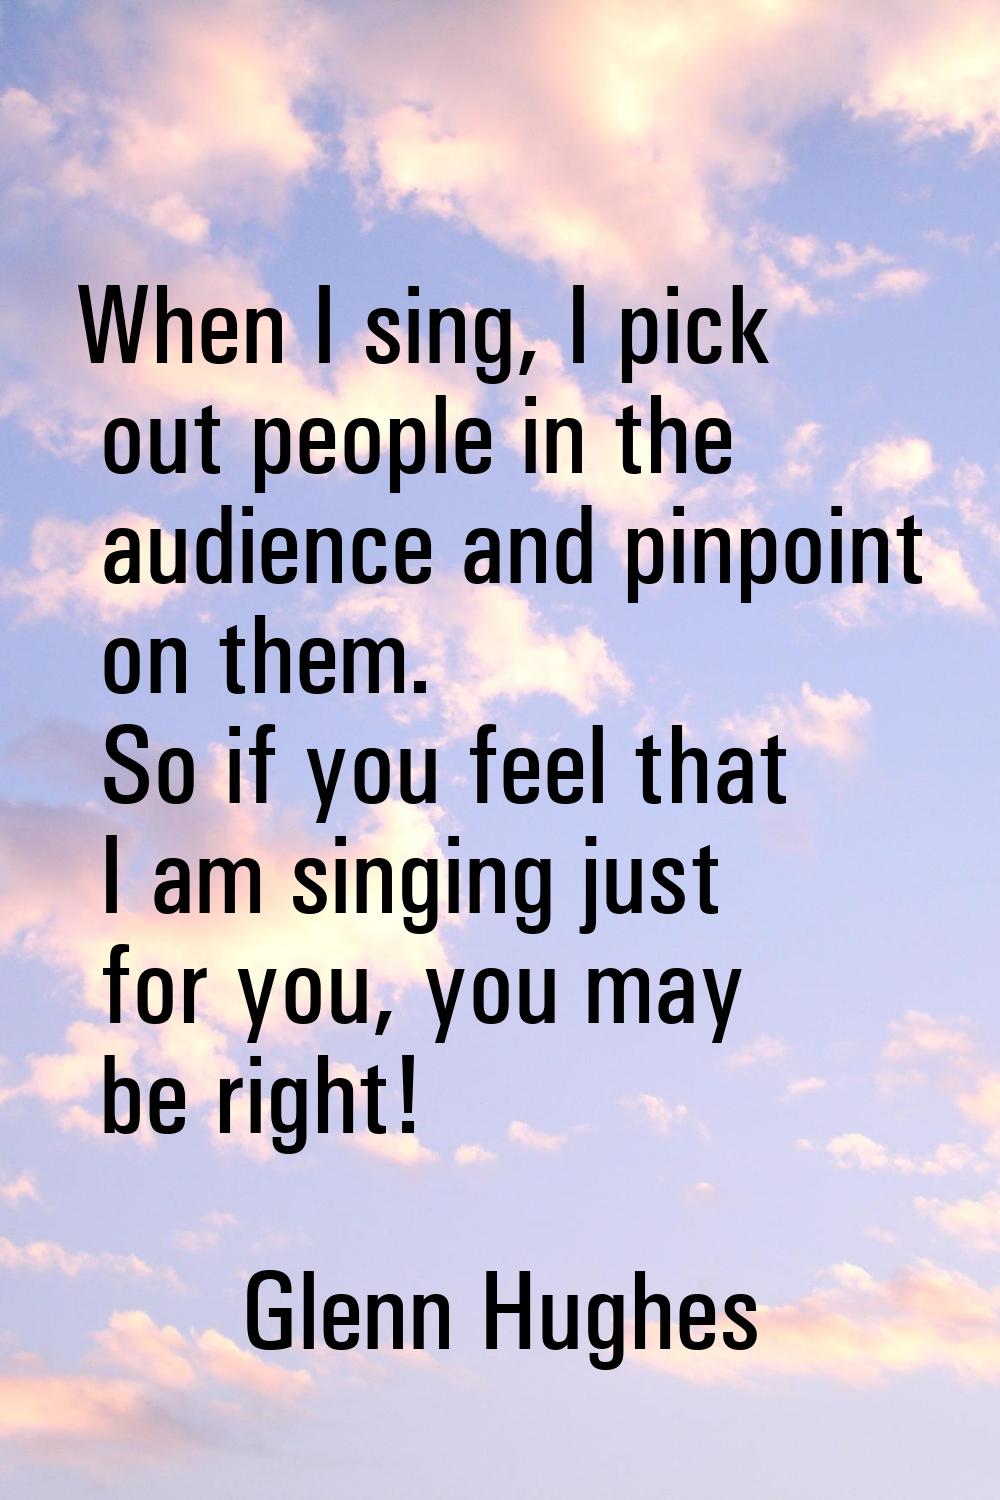 When I sing, I pick out people in the audience and pinpoint on them. So if you feel that I am singi